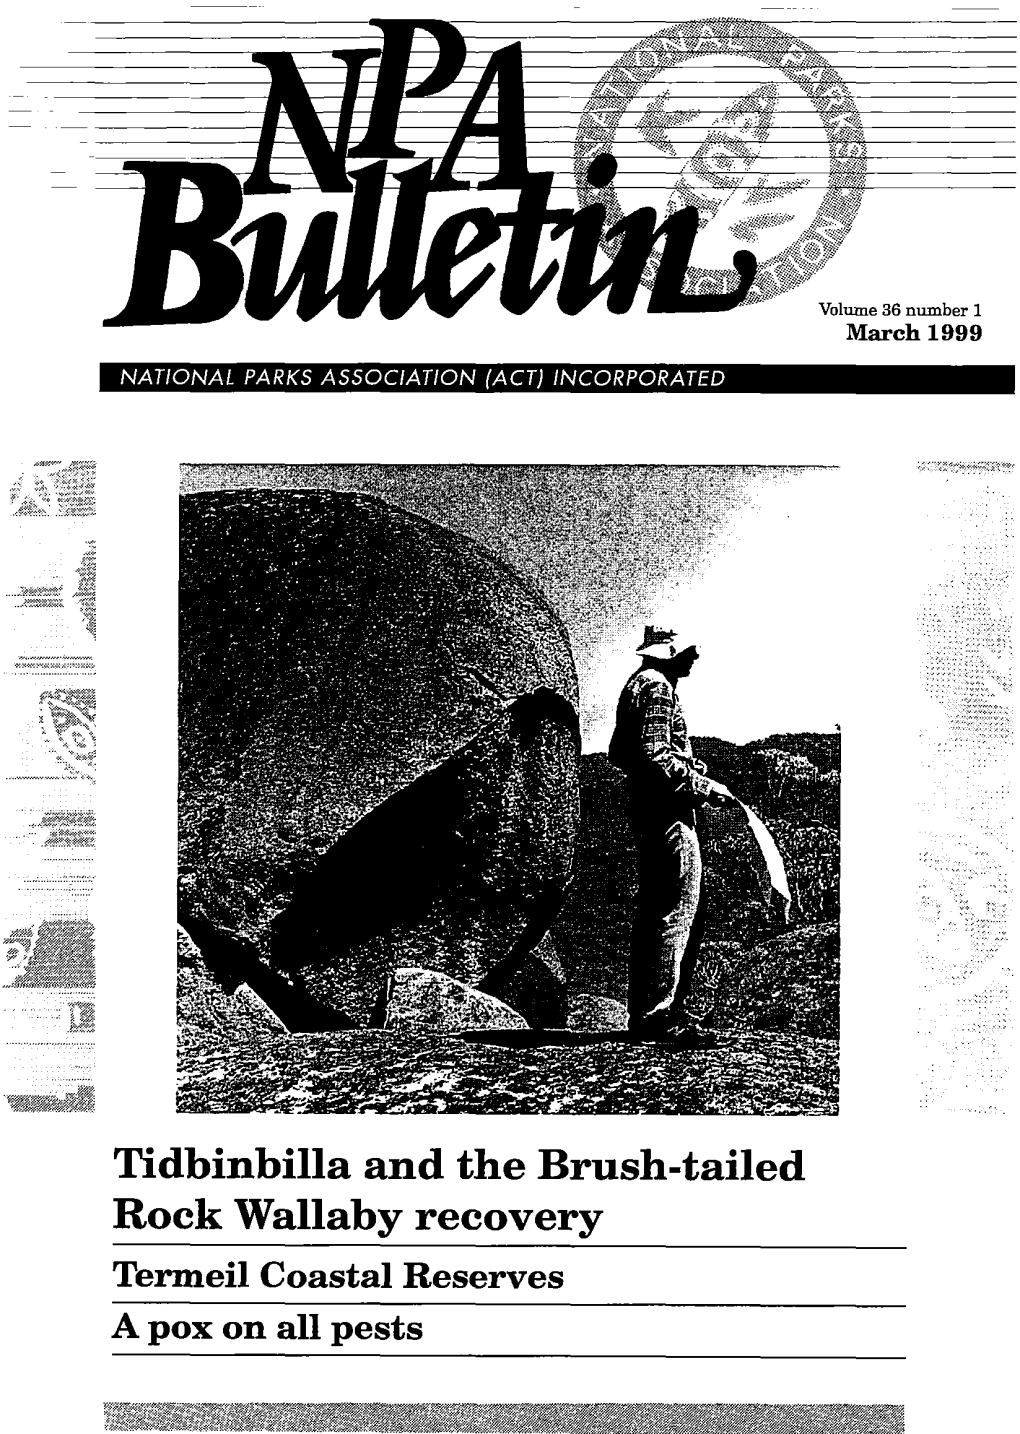 Tidbinbilla and the Brush-Tailed Rock Wallaby Recovery Termeil Coastal Reserves a Pox on All Pests NPA BULLETIN Volume 36 Number 1 March 1999